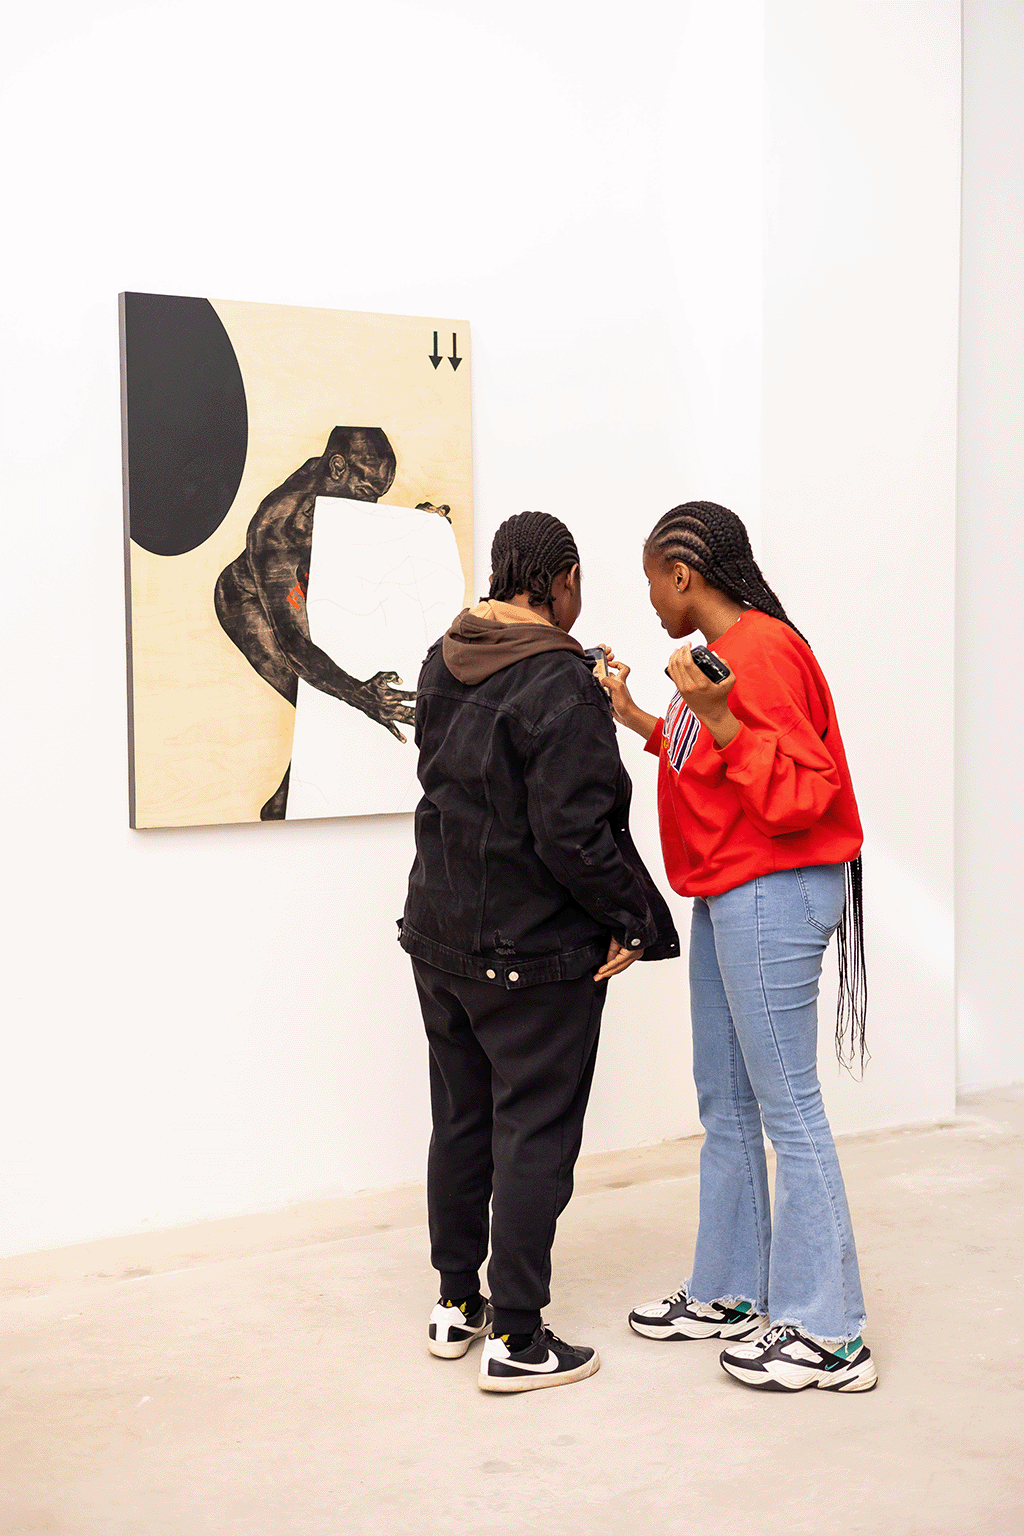 Installation view of Identity is Fragile II at the Afropolis group exhibition. Charcoal and paint on wood. 120 x 90 x 4.5cm. (Serge Alain Nitegeka) (© Copyright 2022, STEVENSON. All rights reserved)